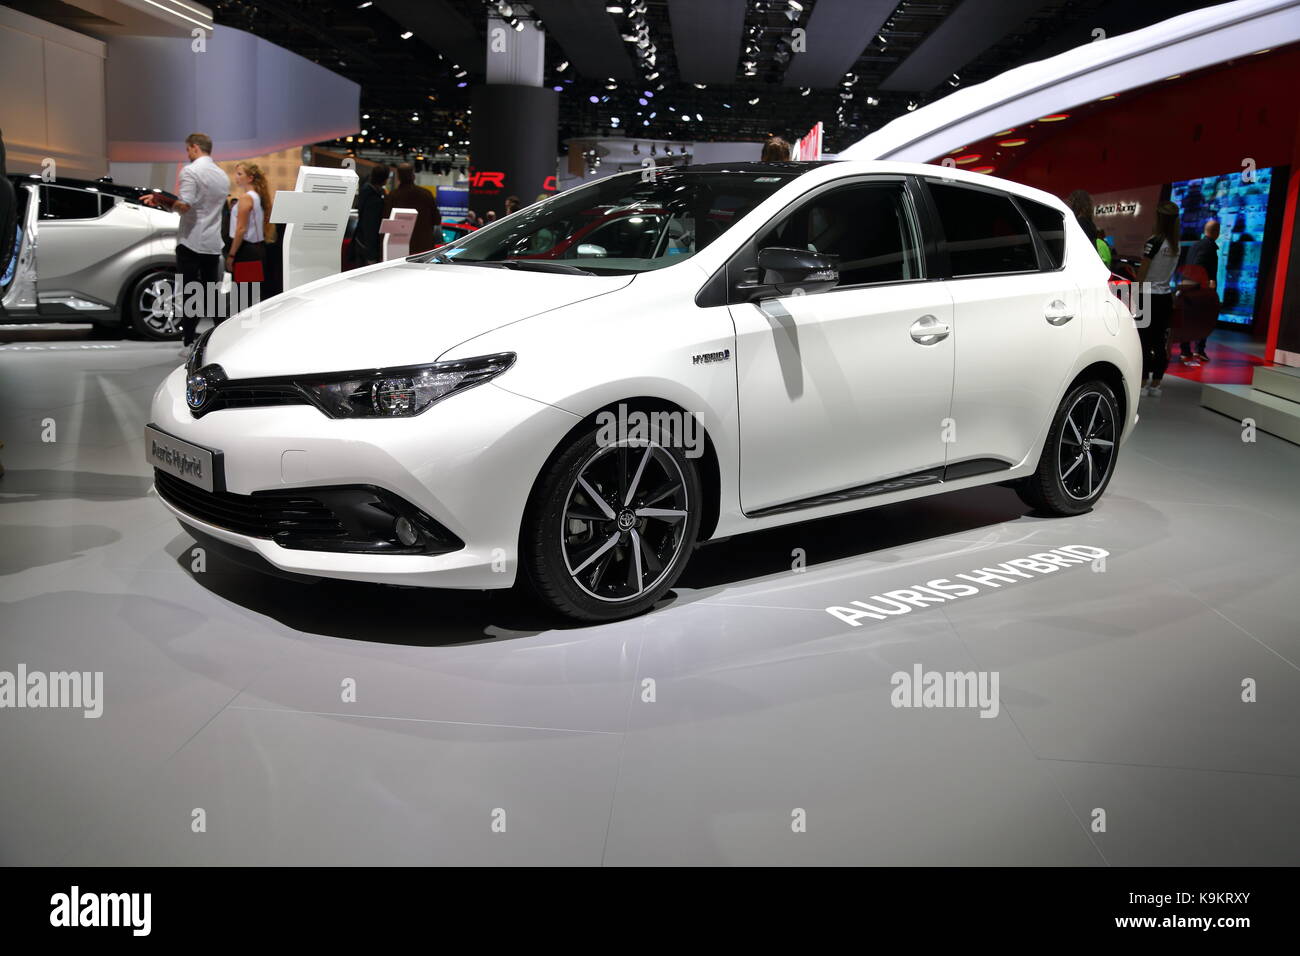 106 Toyota Auris Stock Photos, High-Res Pictures, and Images - Getty Images